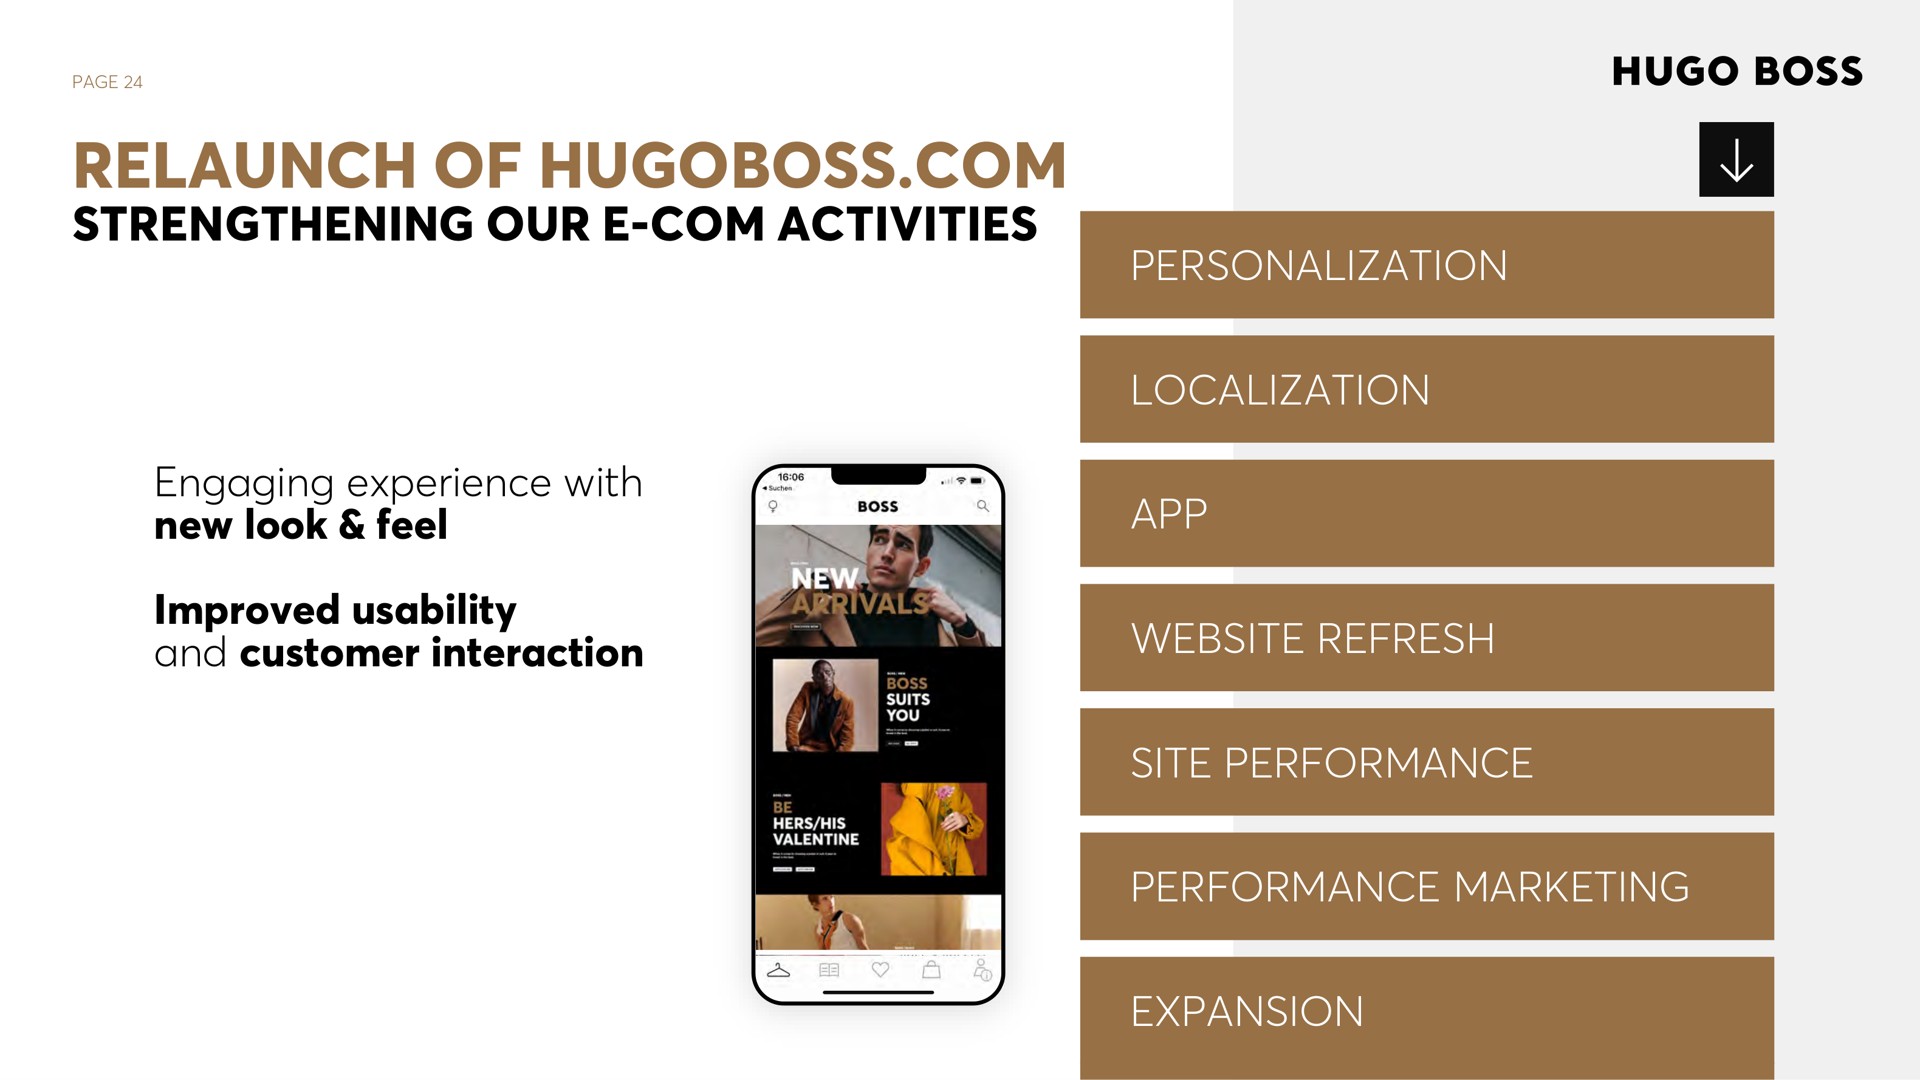 page relaunch of strengthening our activities engaging experience with new look feel improved usability and customer interaction personalization localization refresh site performance performance marketing expansion | Hugo Boss